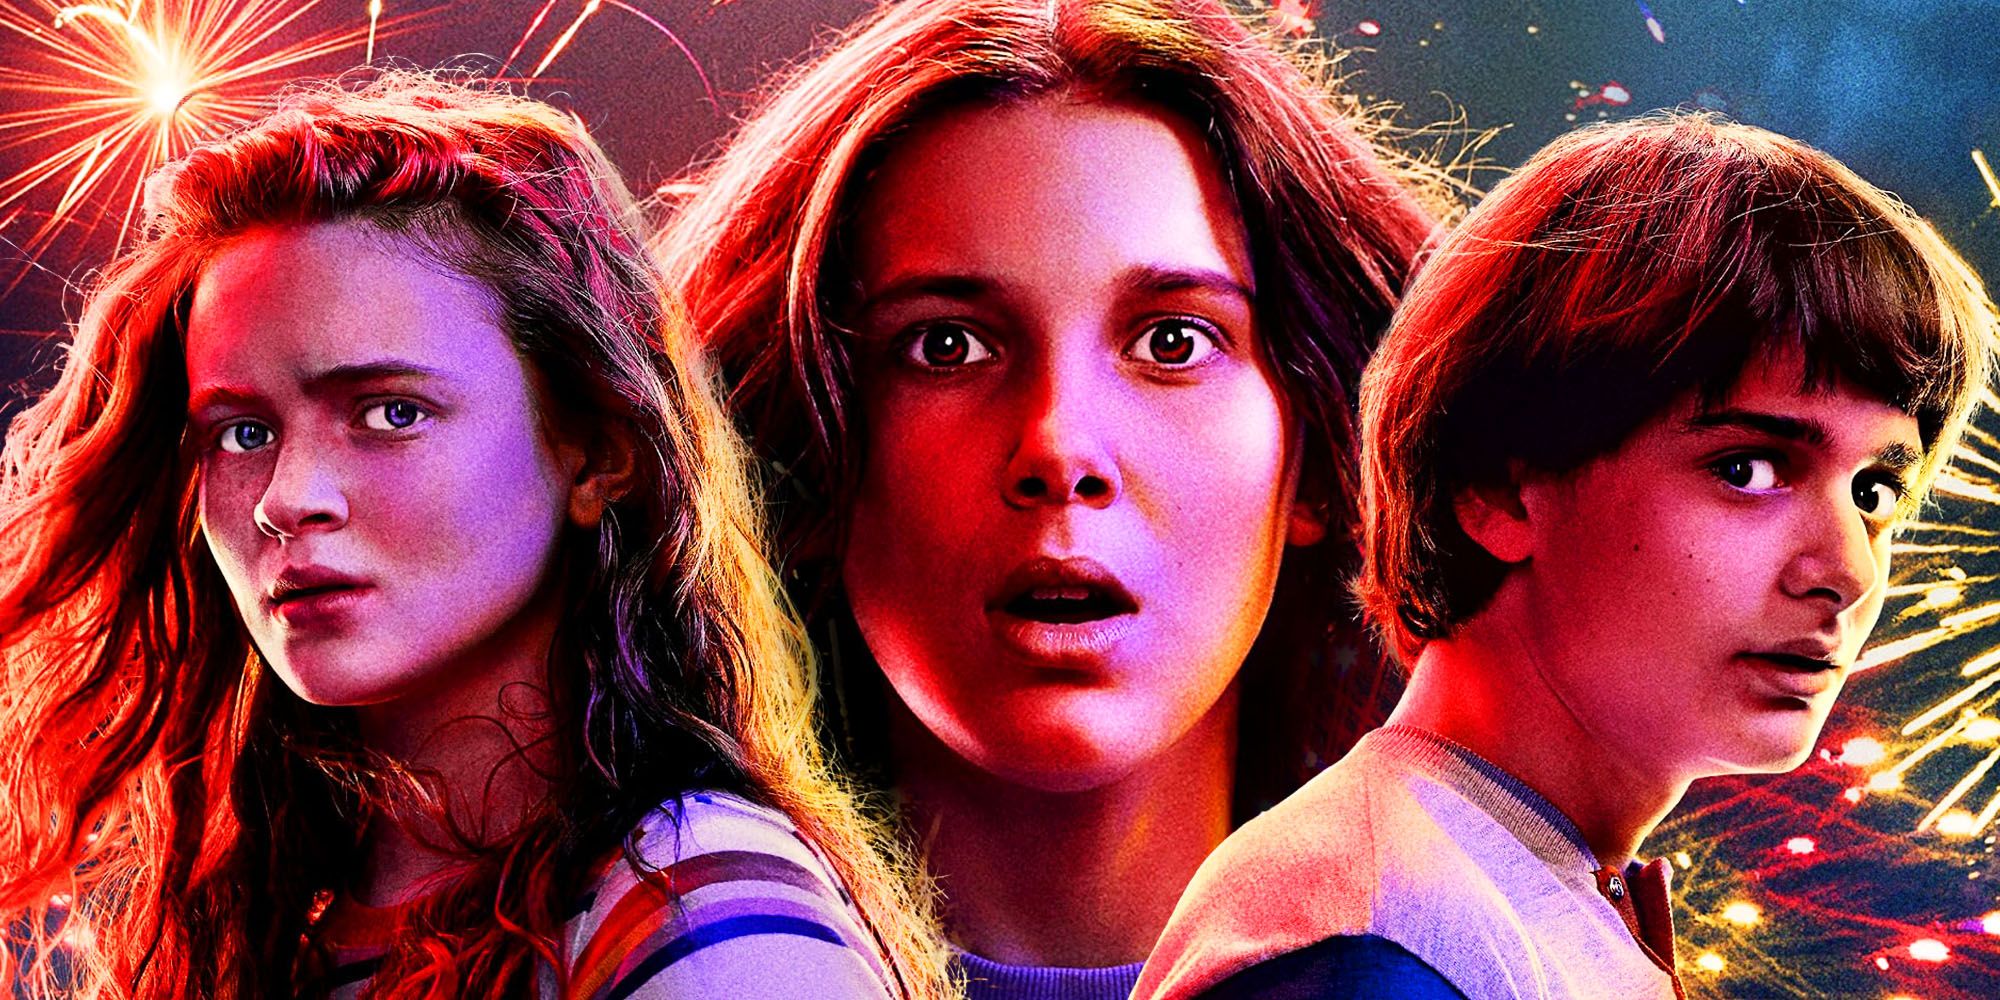 Stranger Things' Season 4 Vol. 2 Review: An Exhilarating, Tear-Jerking  Climax of A Penultimate Season, Arts